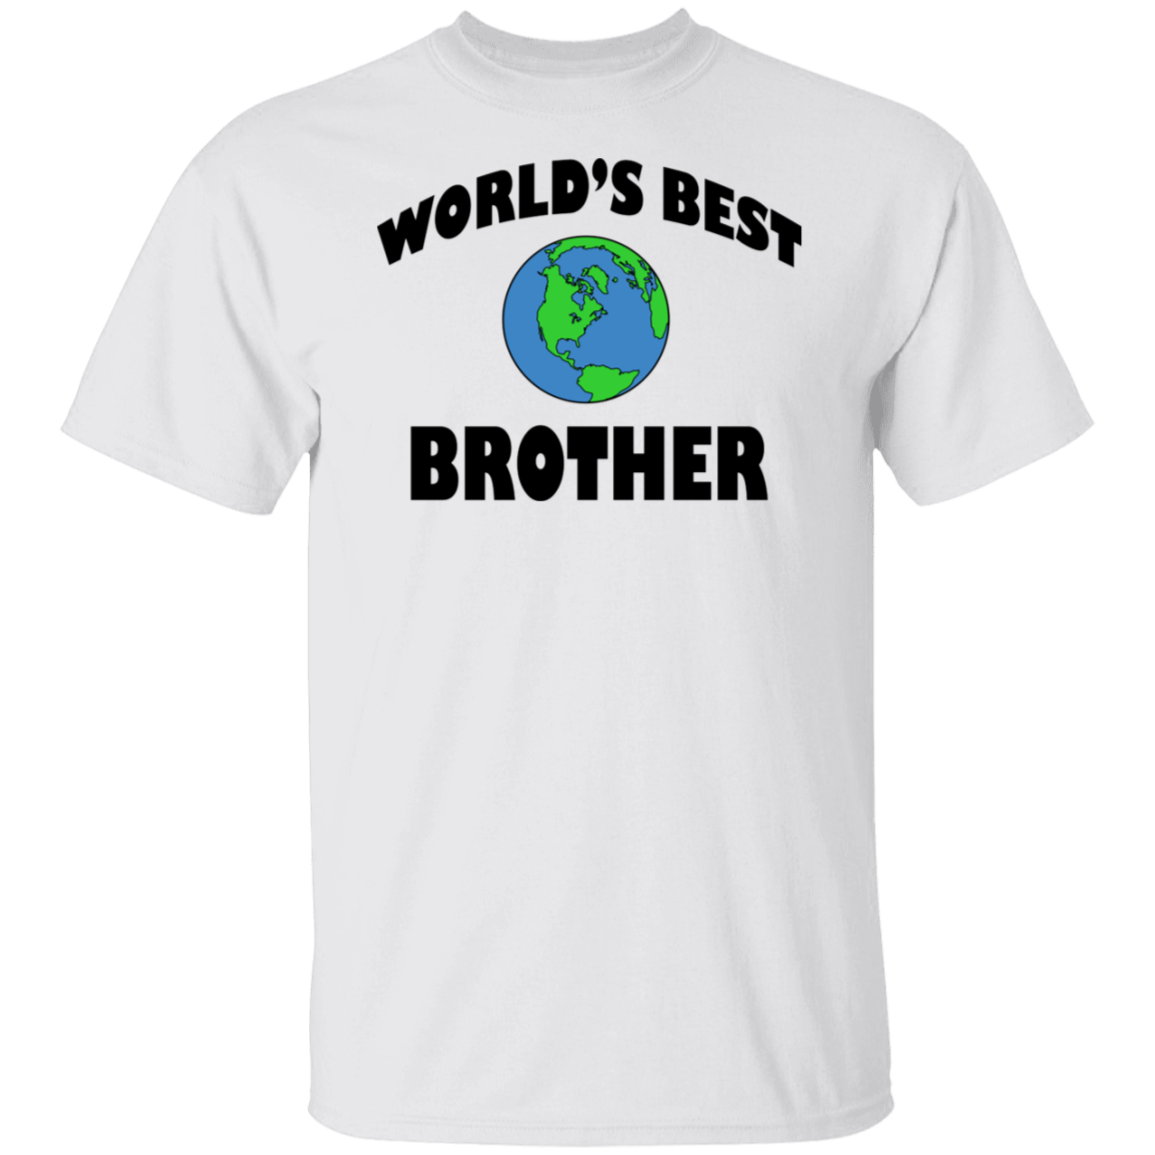 World's Best Brother T-Shirt